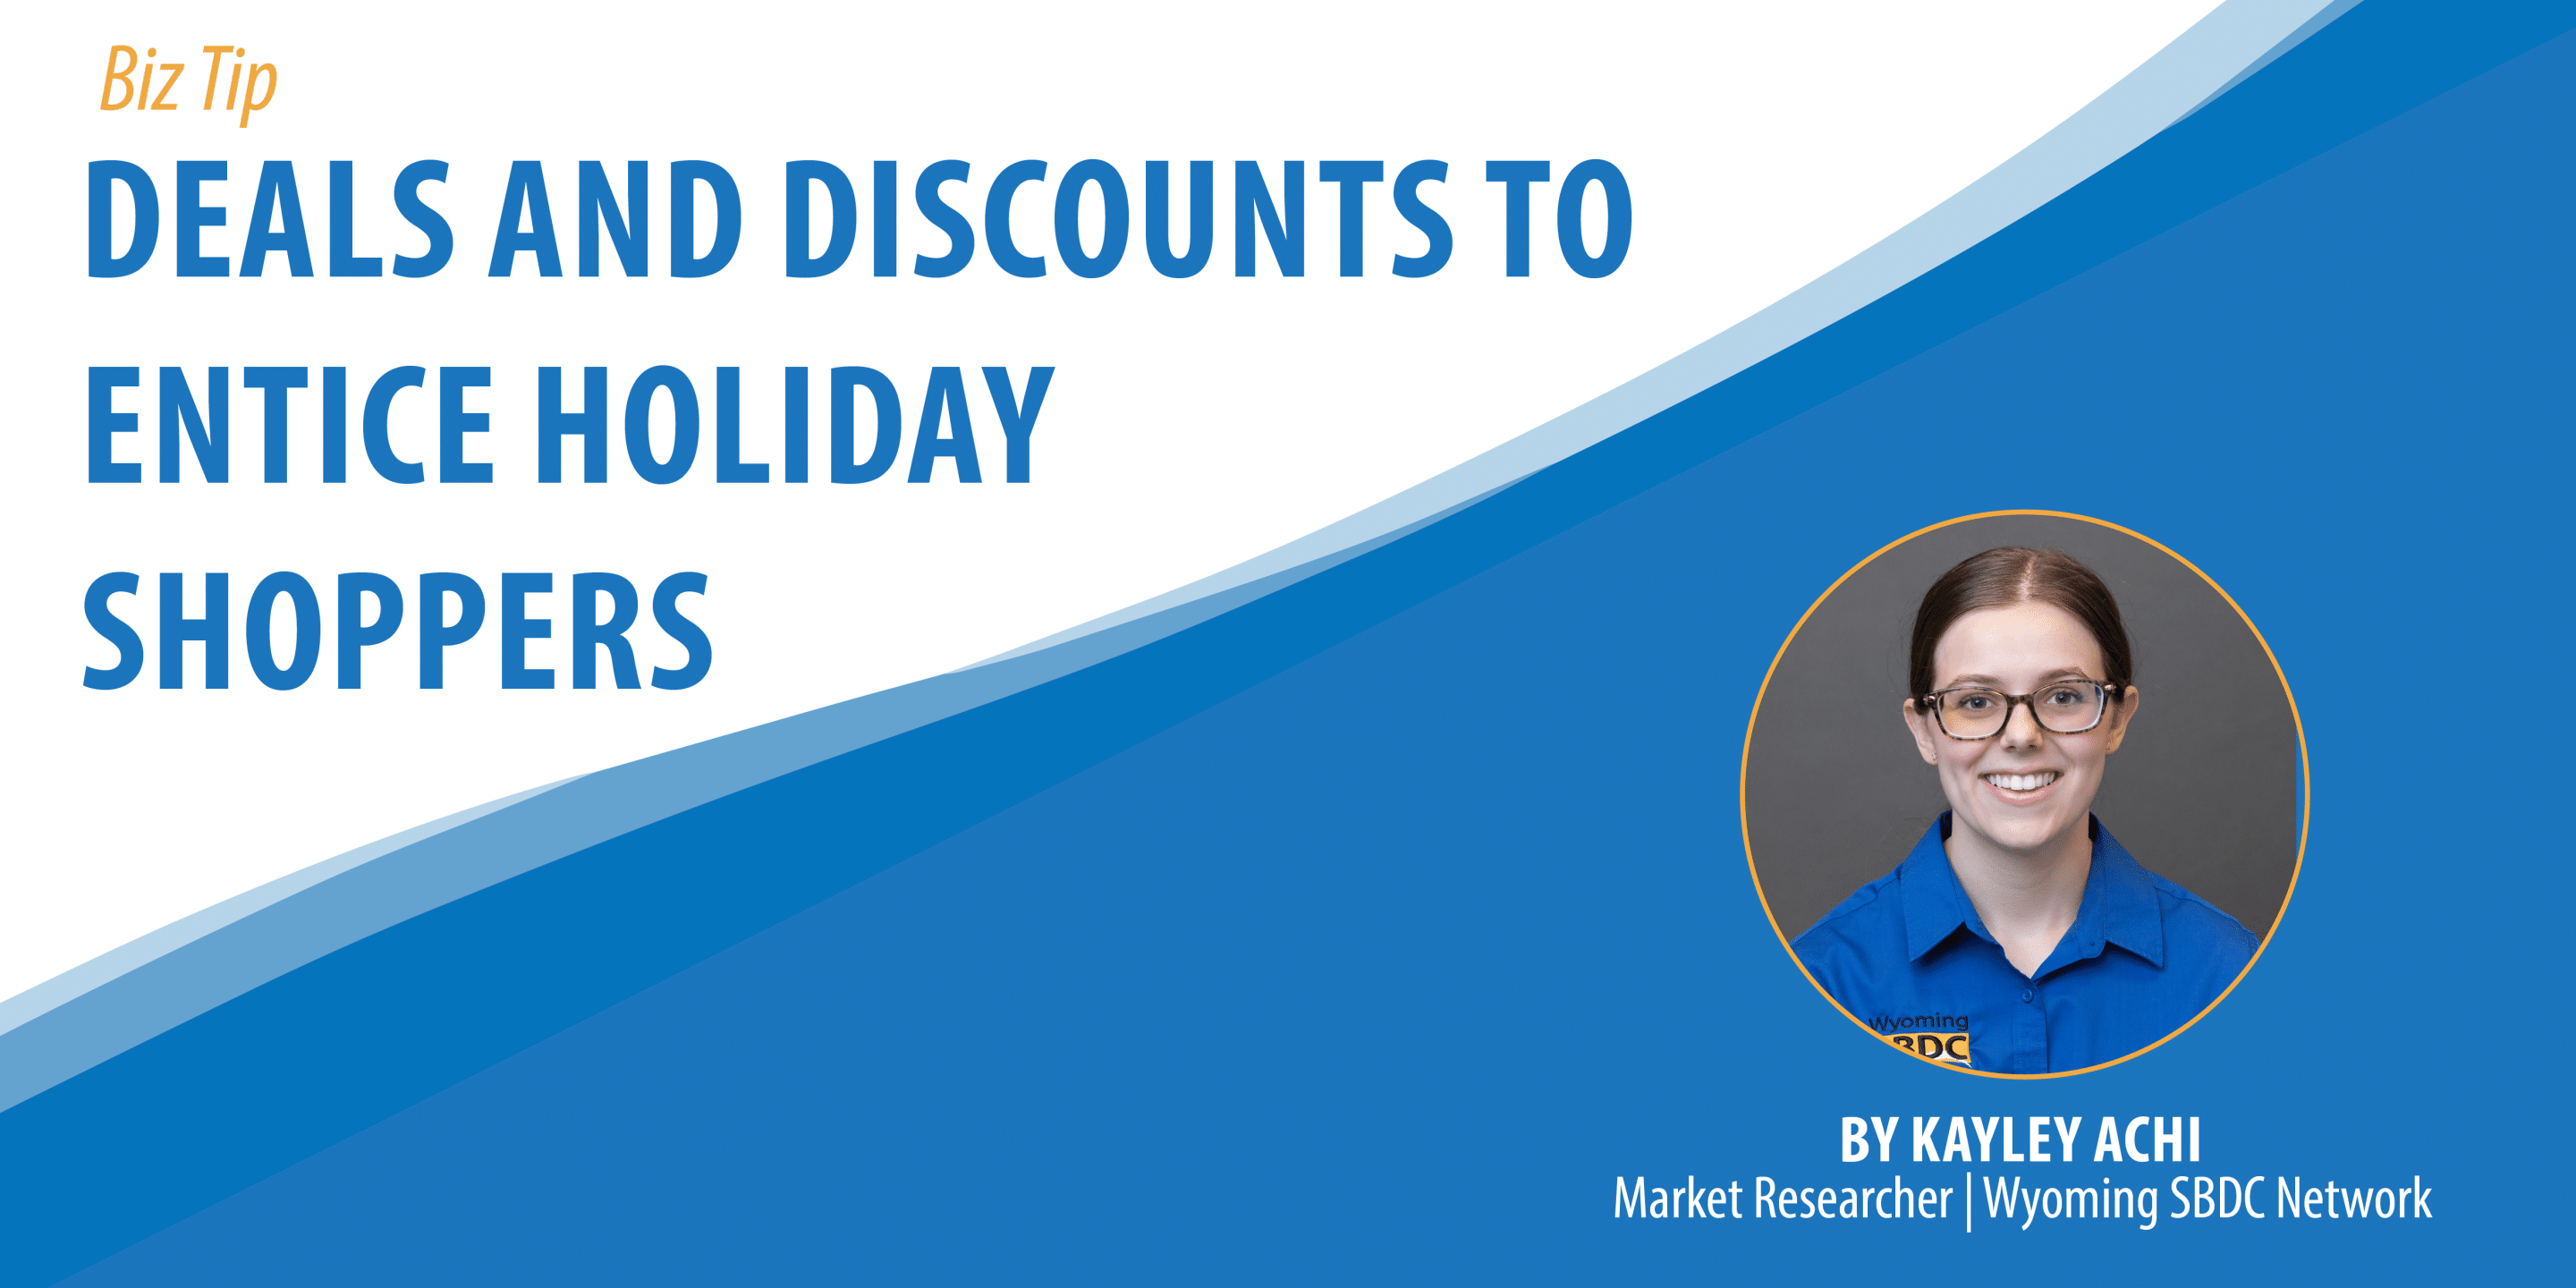 Deals and Discounts to Entice Holiday Shoppers